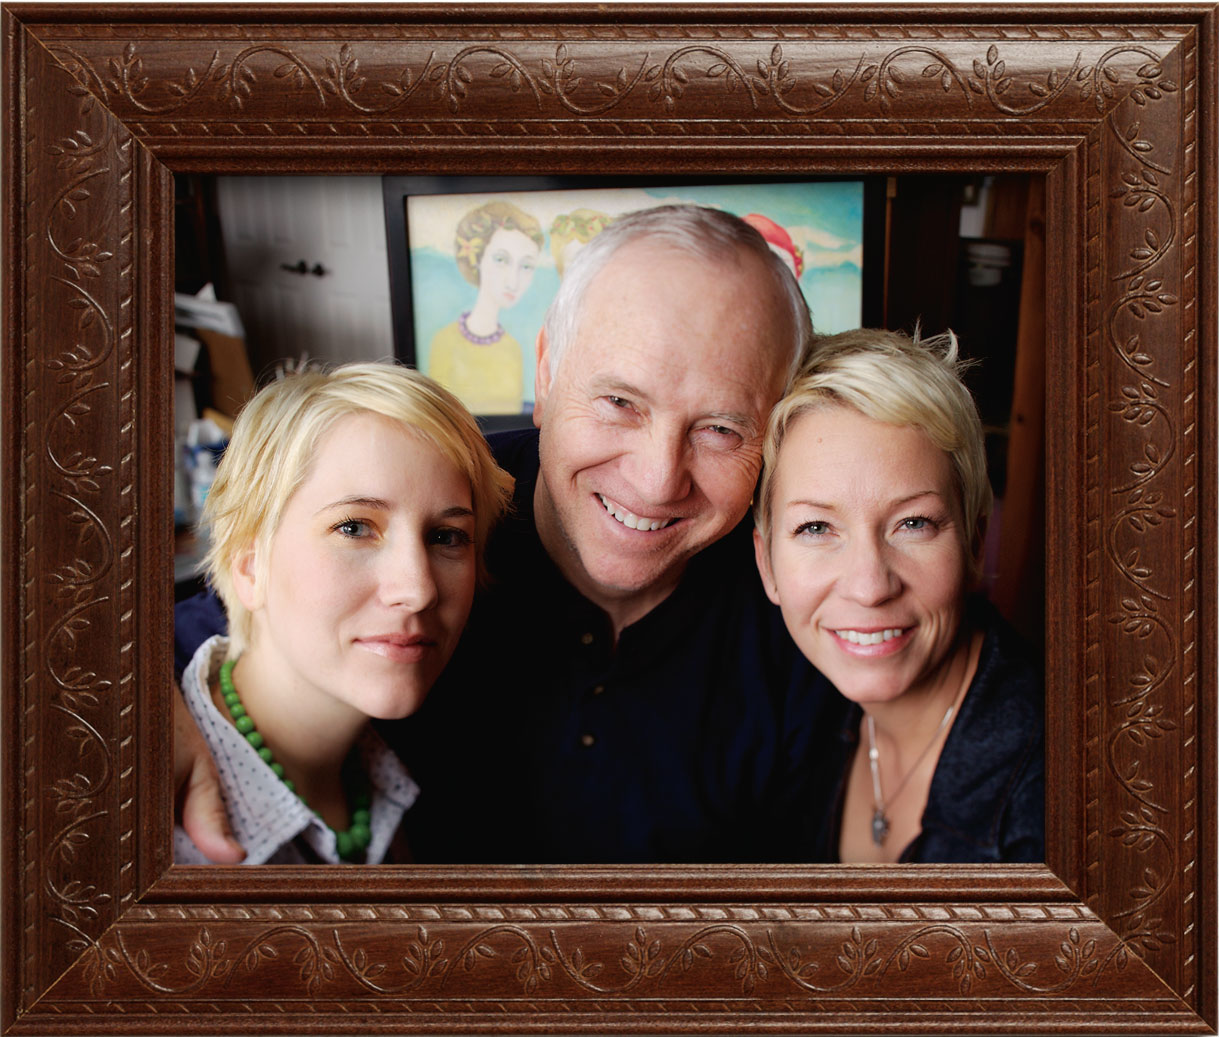 Artist James Christensen with his two artist daughters